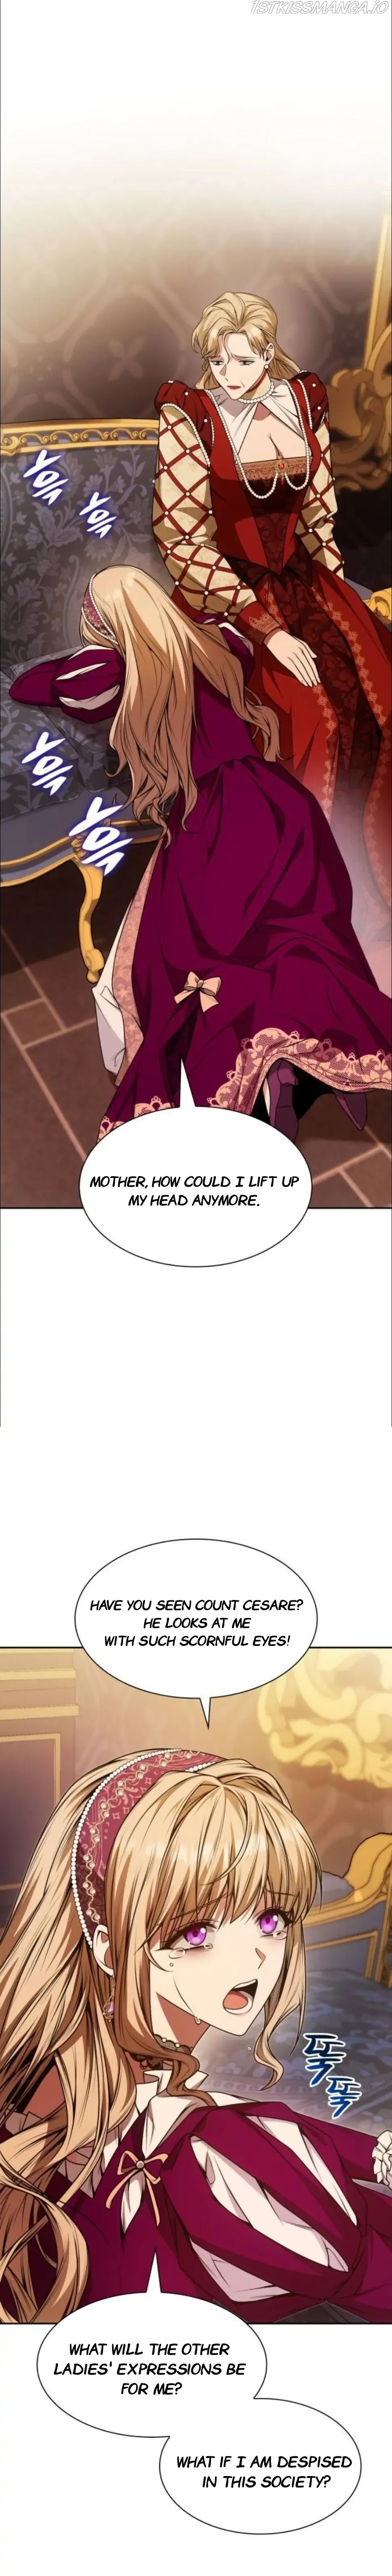 Sister, I Am the Queen in This Life chapter 18.5 - page 2